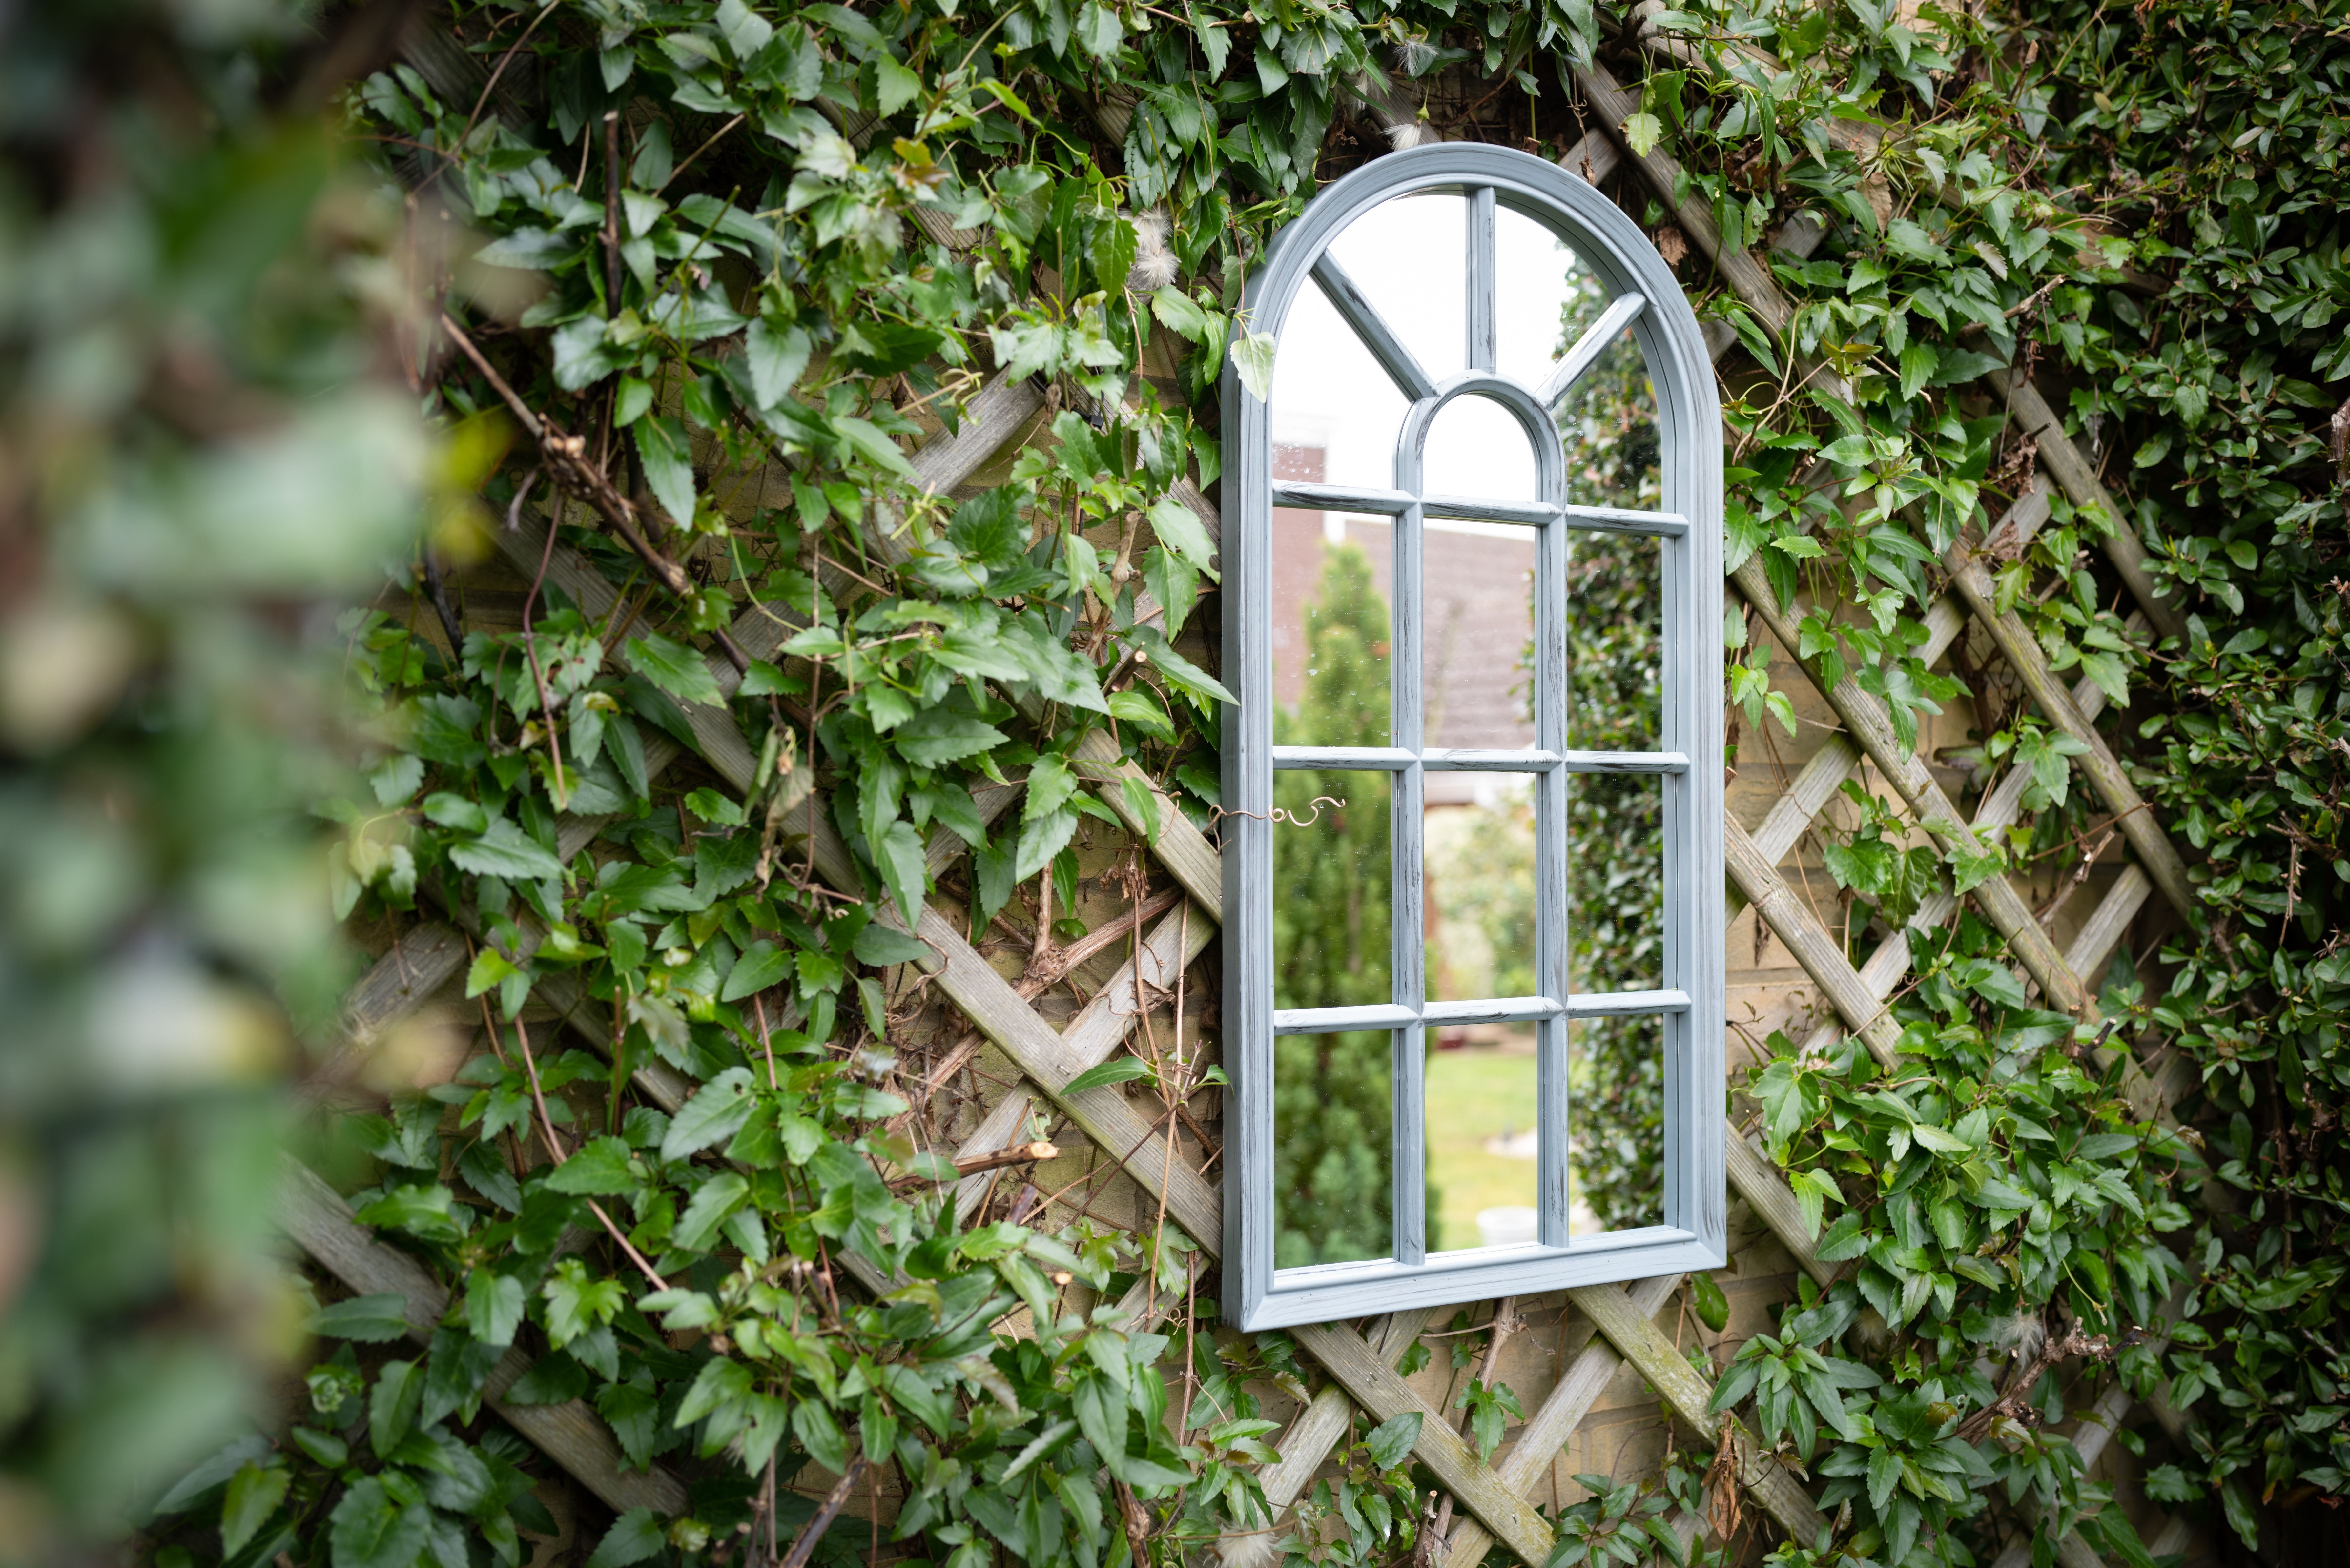 Shallow focus of a secret garden showing an ornate mirror seen attached to a trellis with vines growing around the frame.